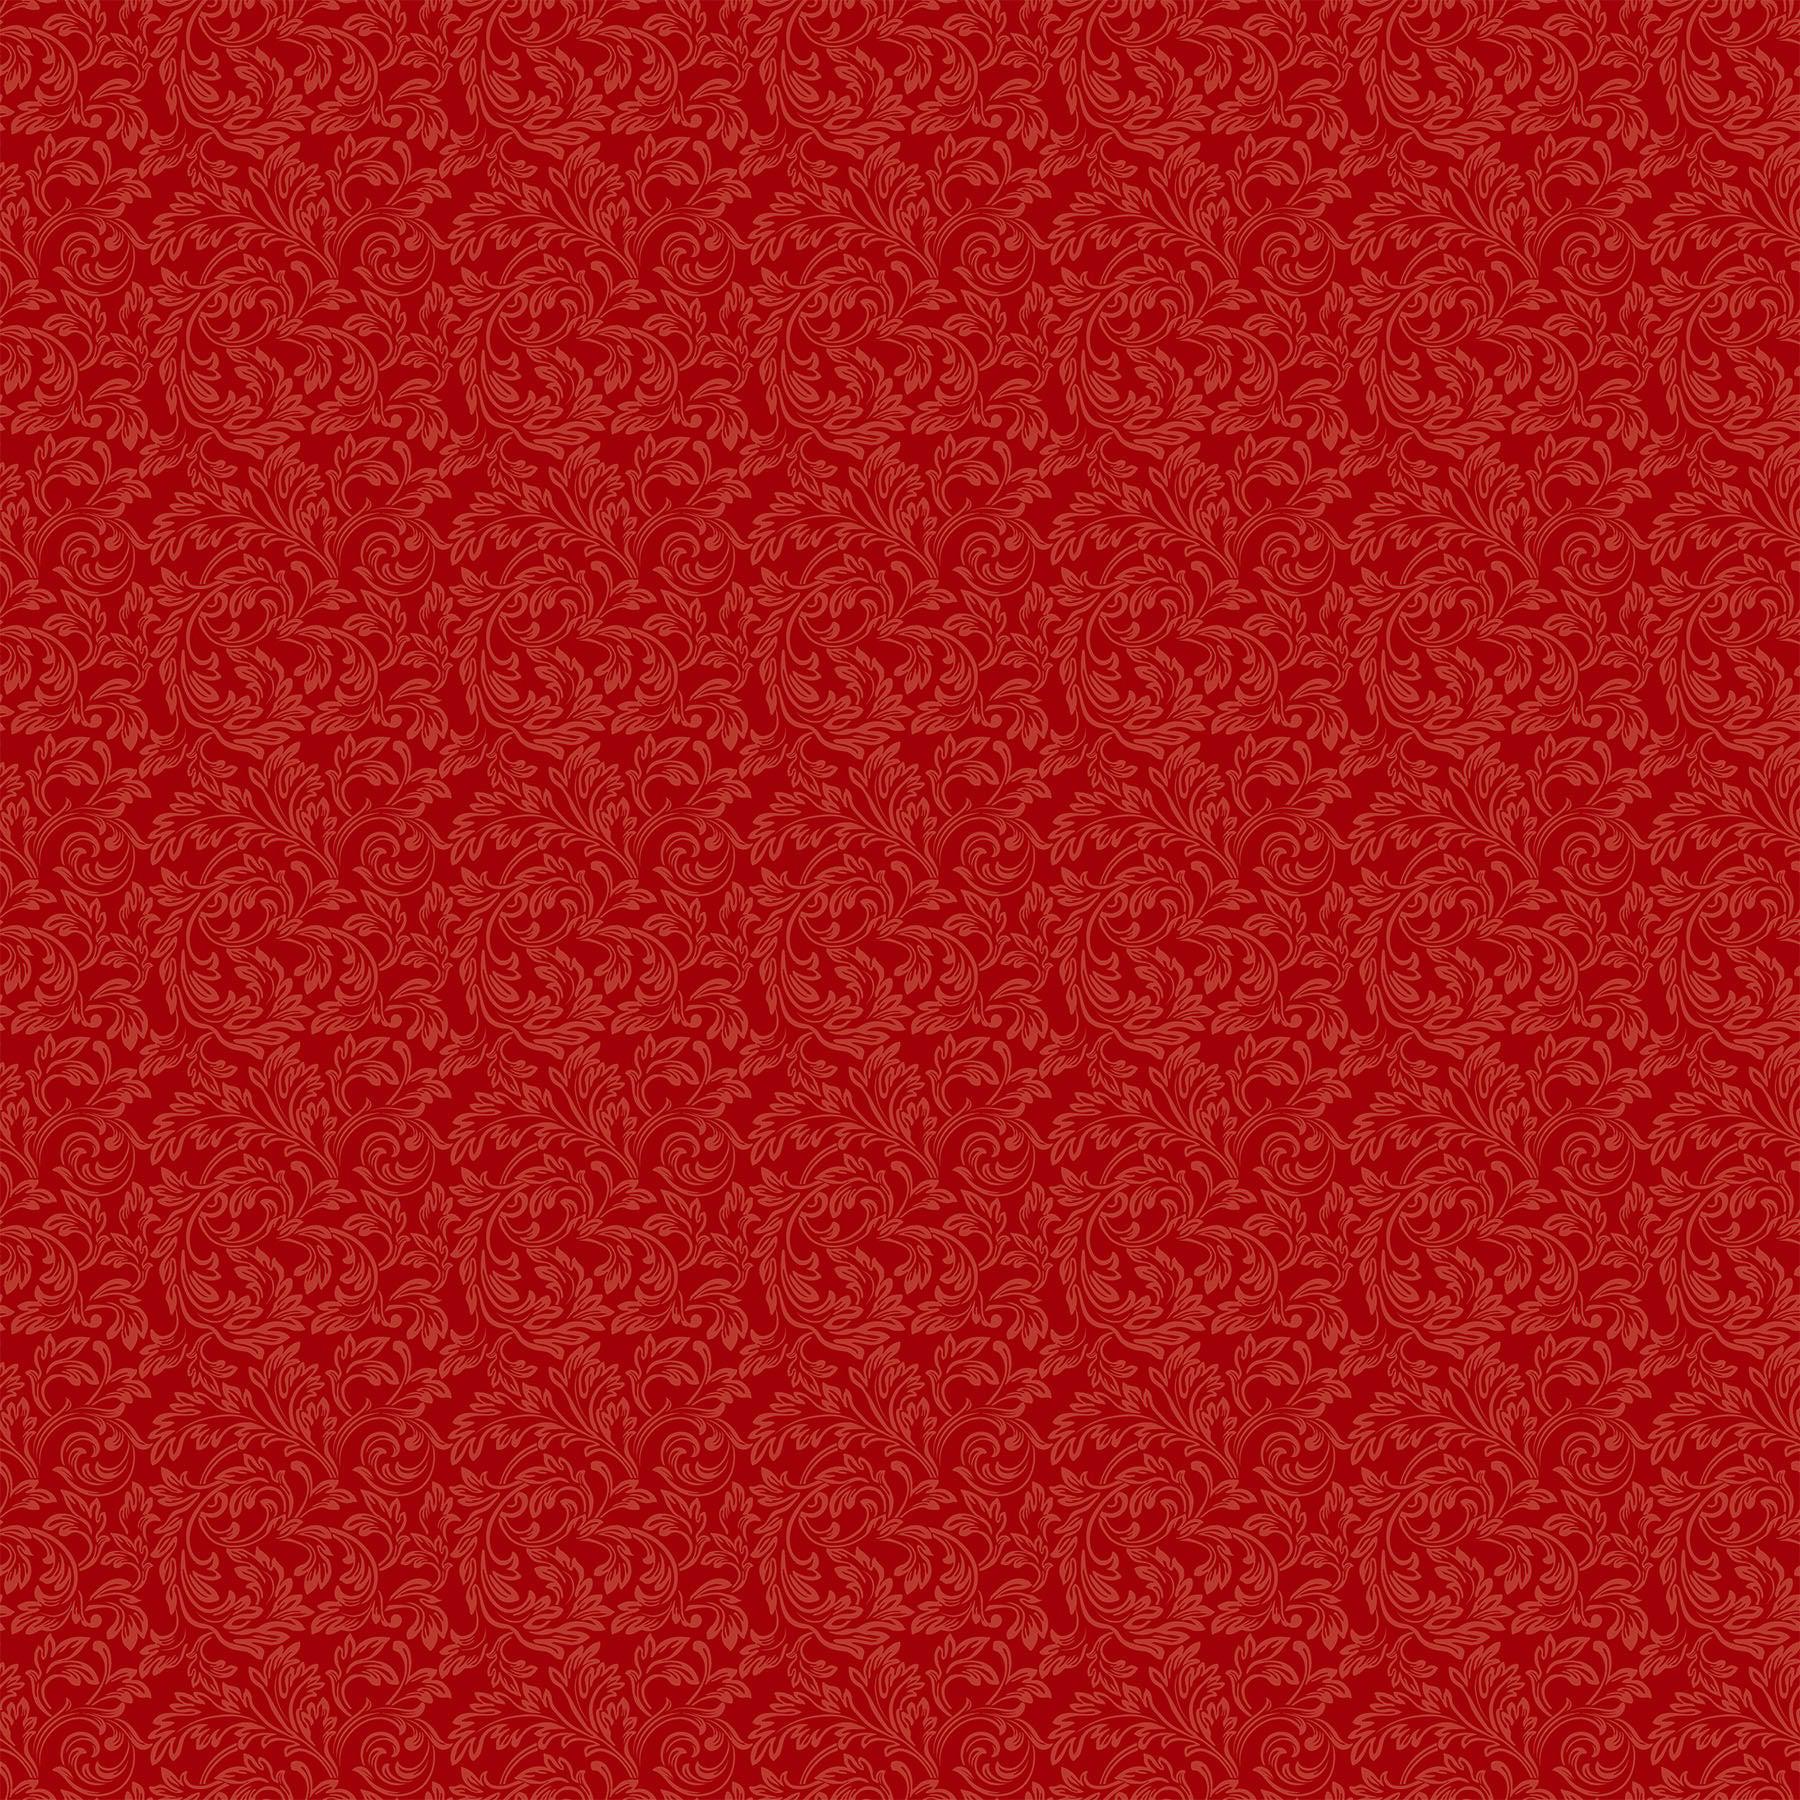 Yuletide Traditions Scroll Red Fabric